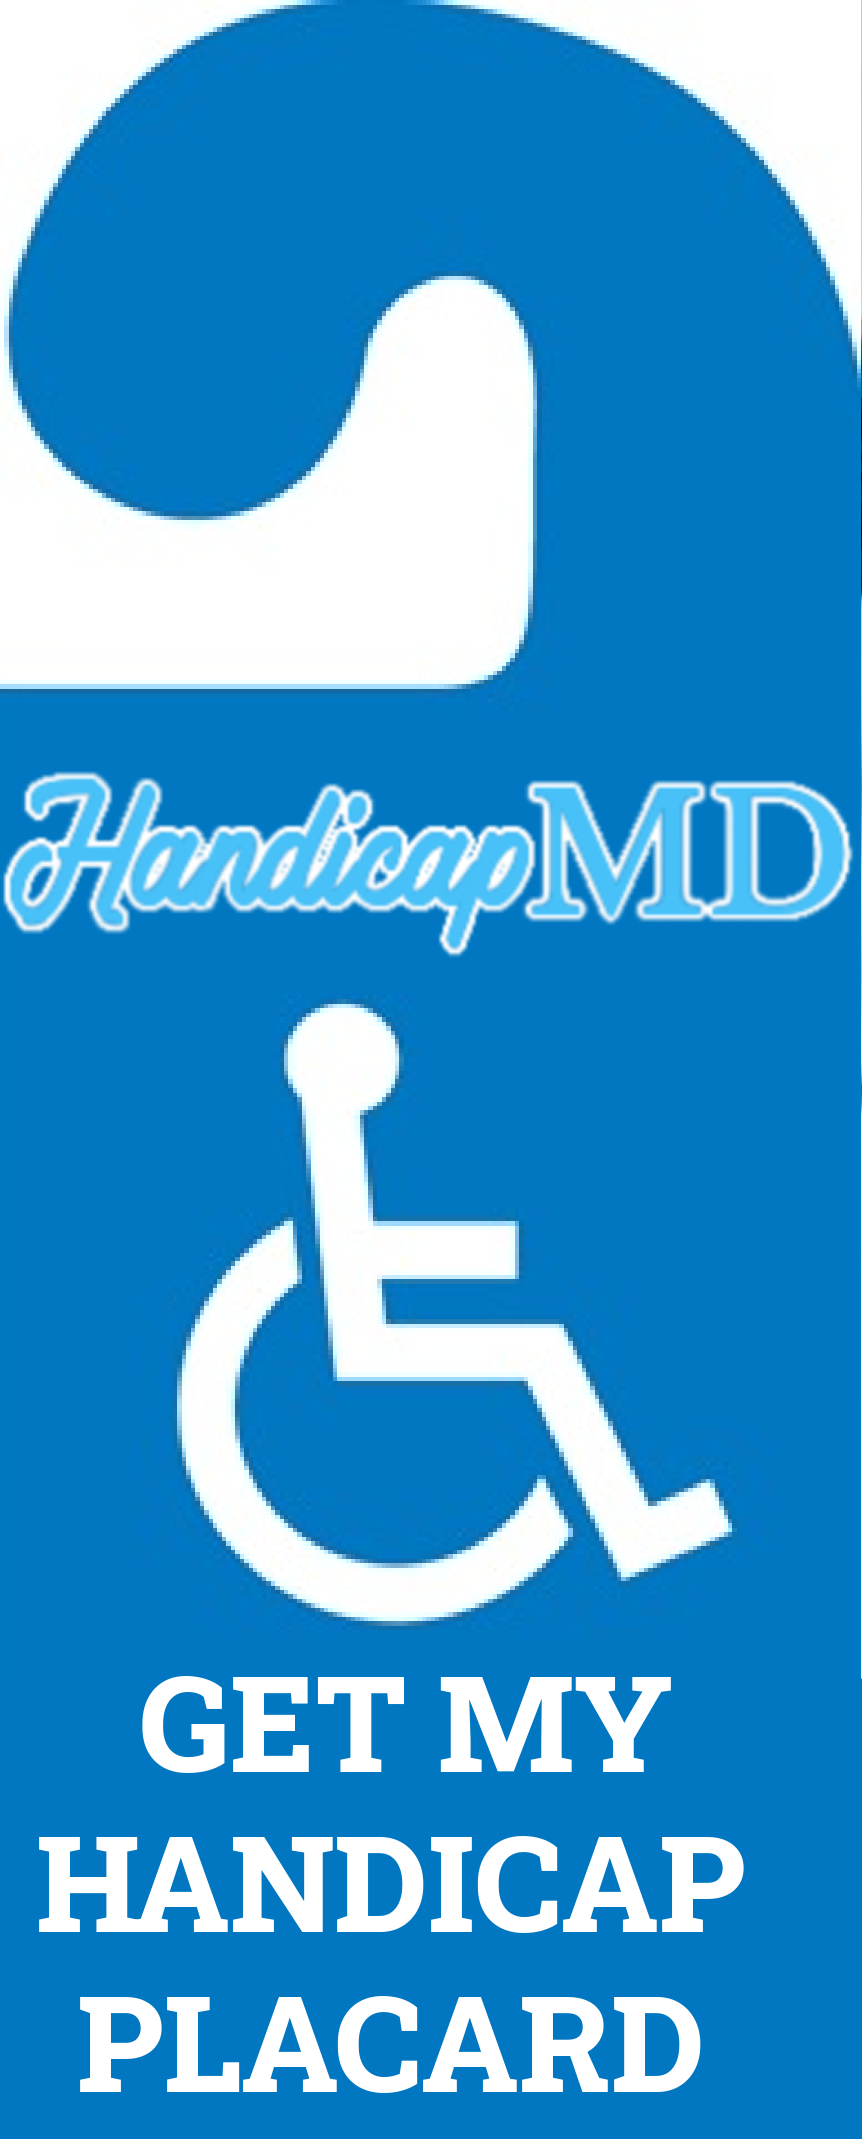 Myths vs. Facts: Debunking Common Misconceptions about Handicap Placards in Idaho